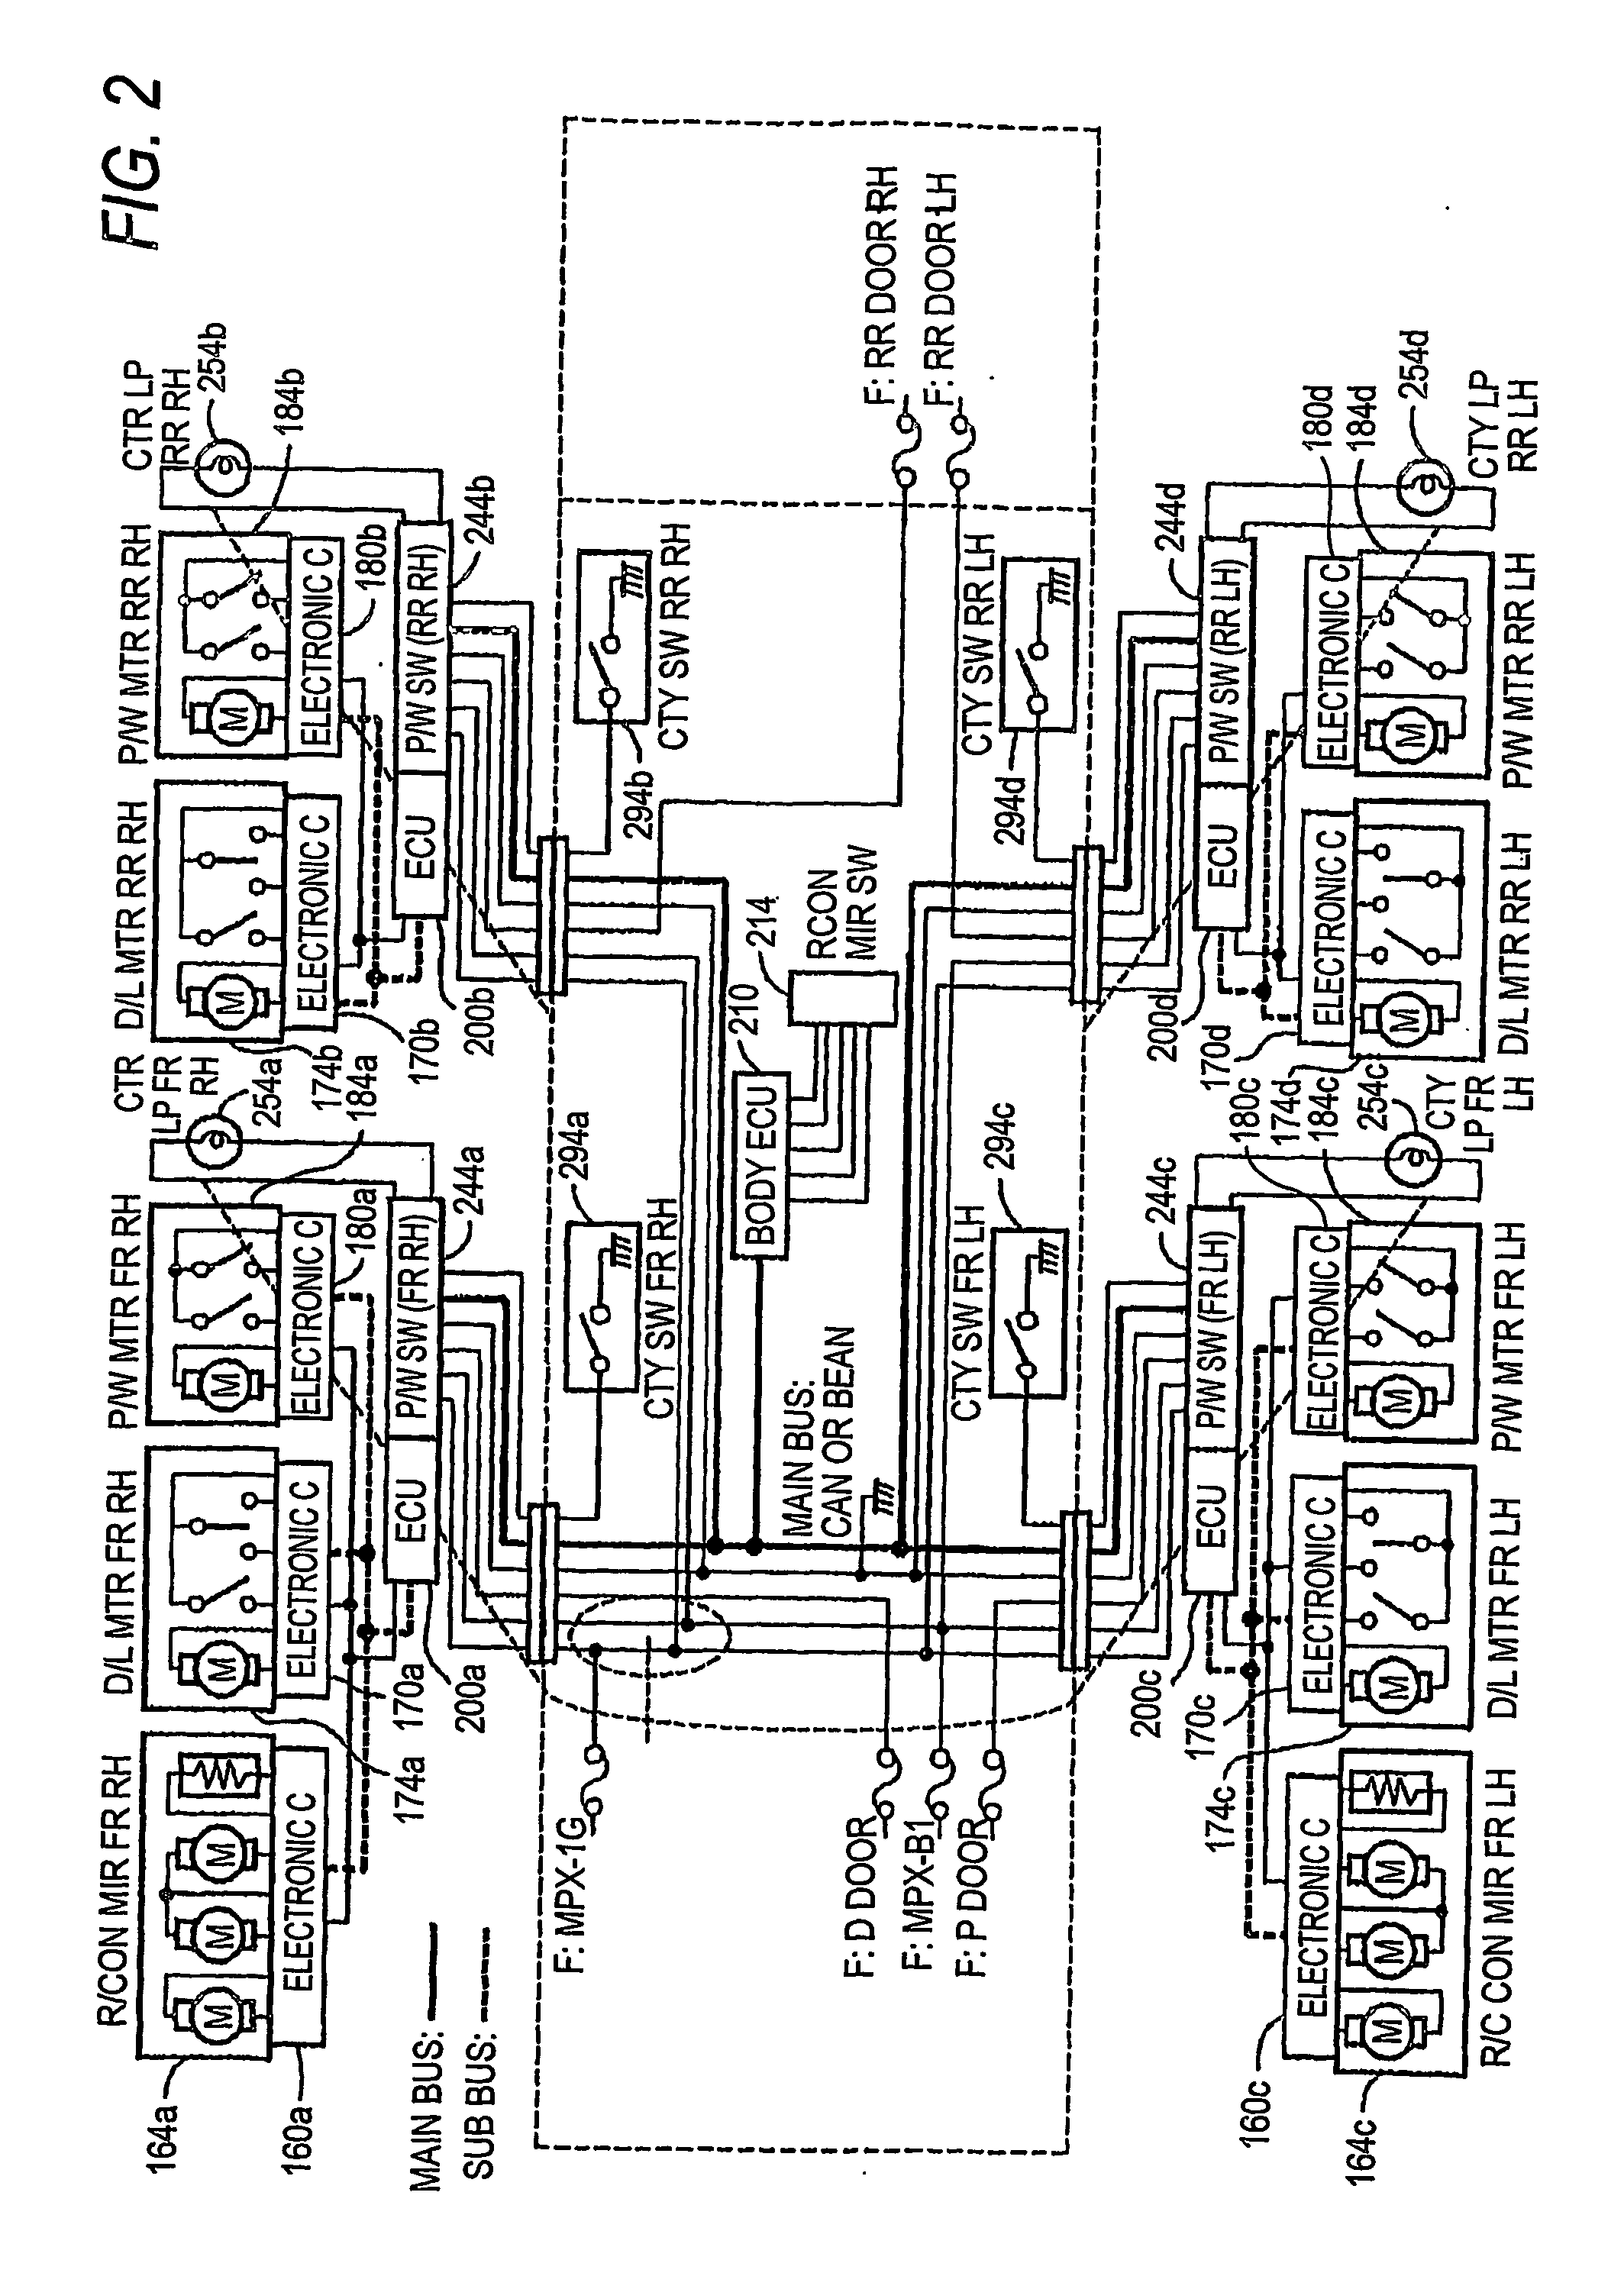 Electronic door system with a lin-subbus